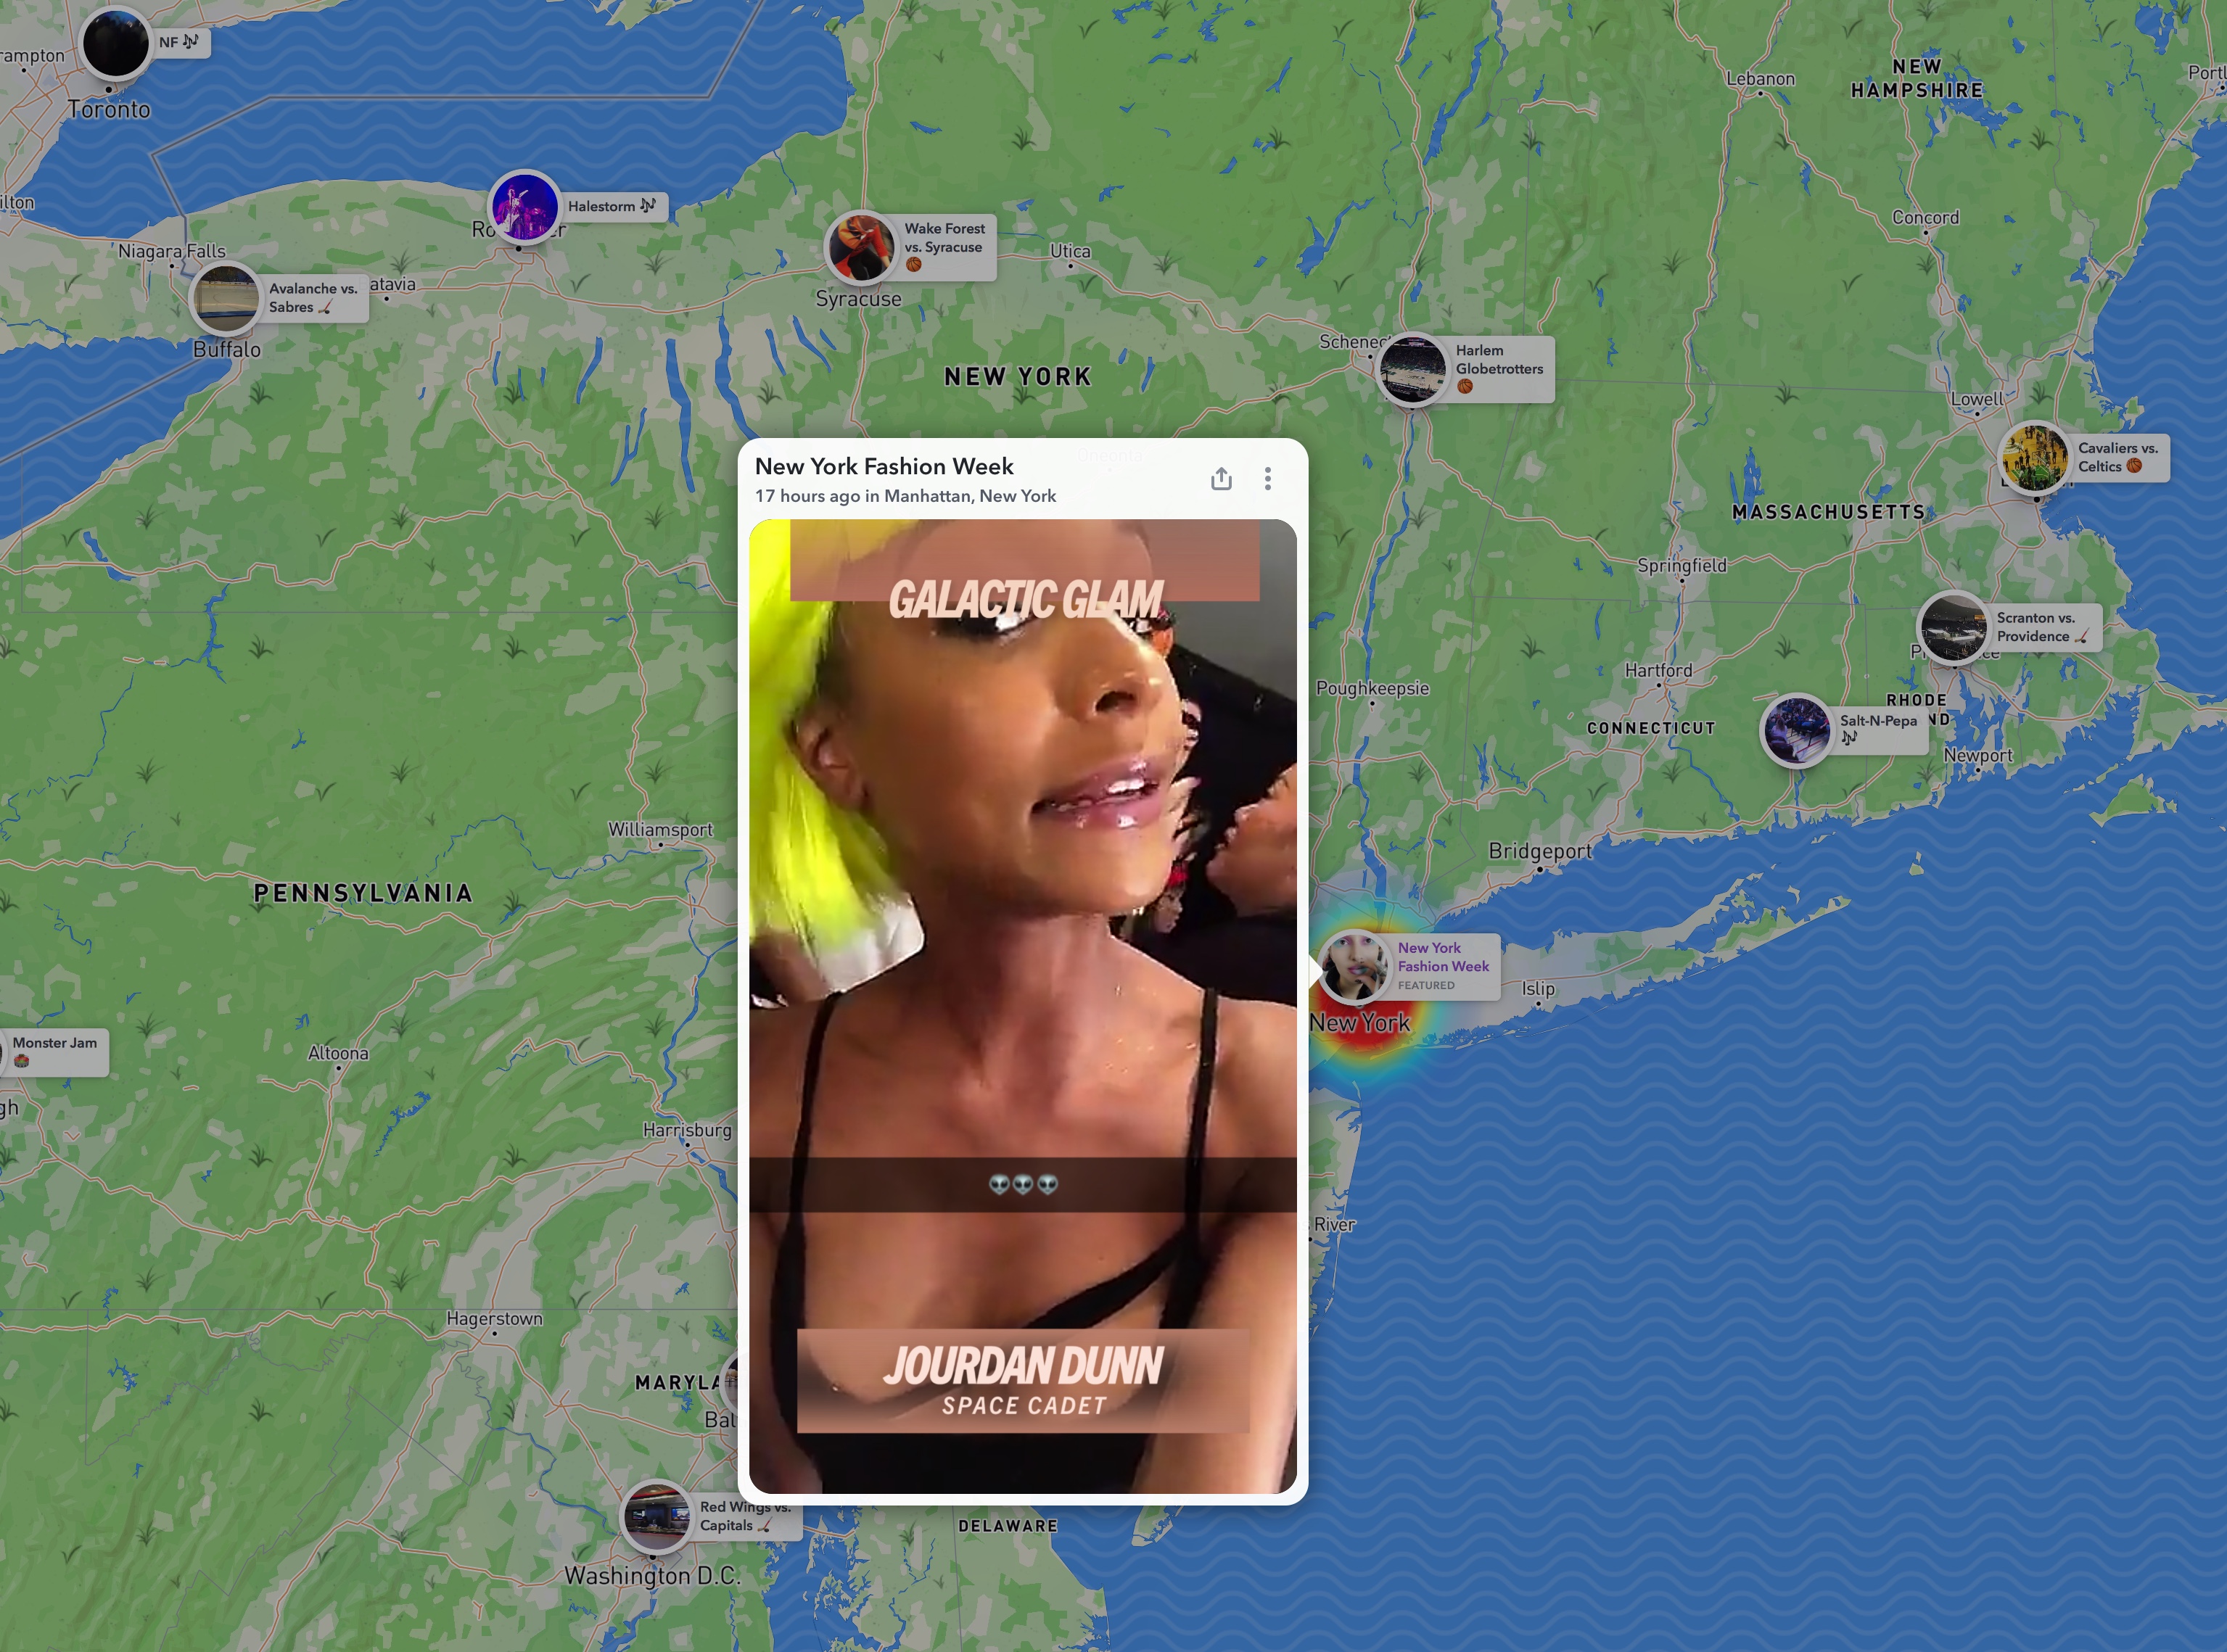 Snapchat’s Snap Map comes to the web, including in embeddable form.